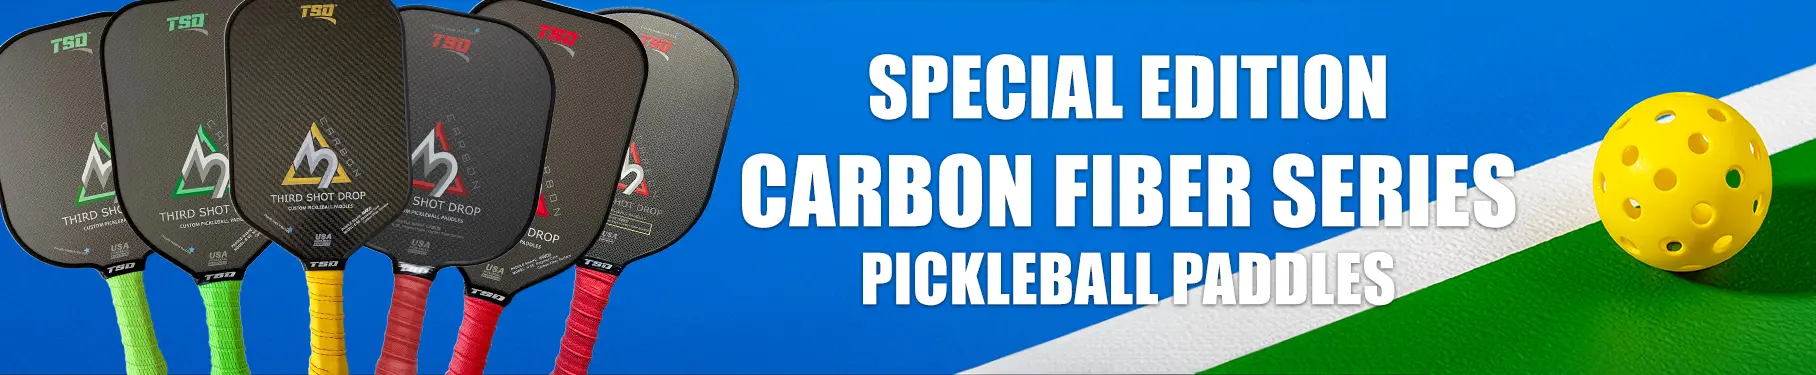 SPECIAL EDITION CARBON FIBER SERIES PICKLEBALL PADDLES